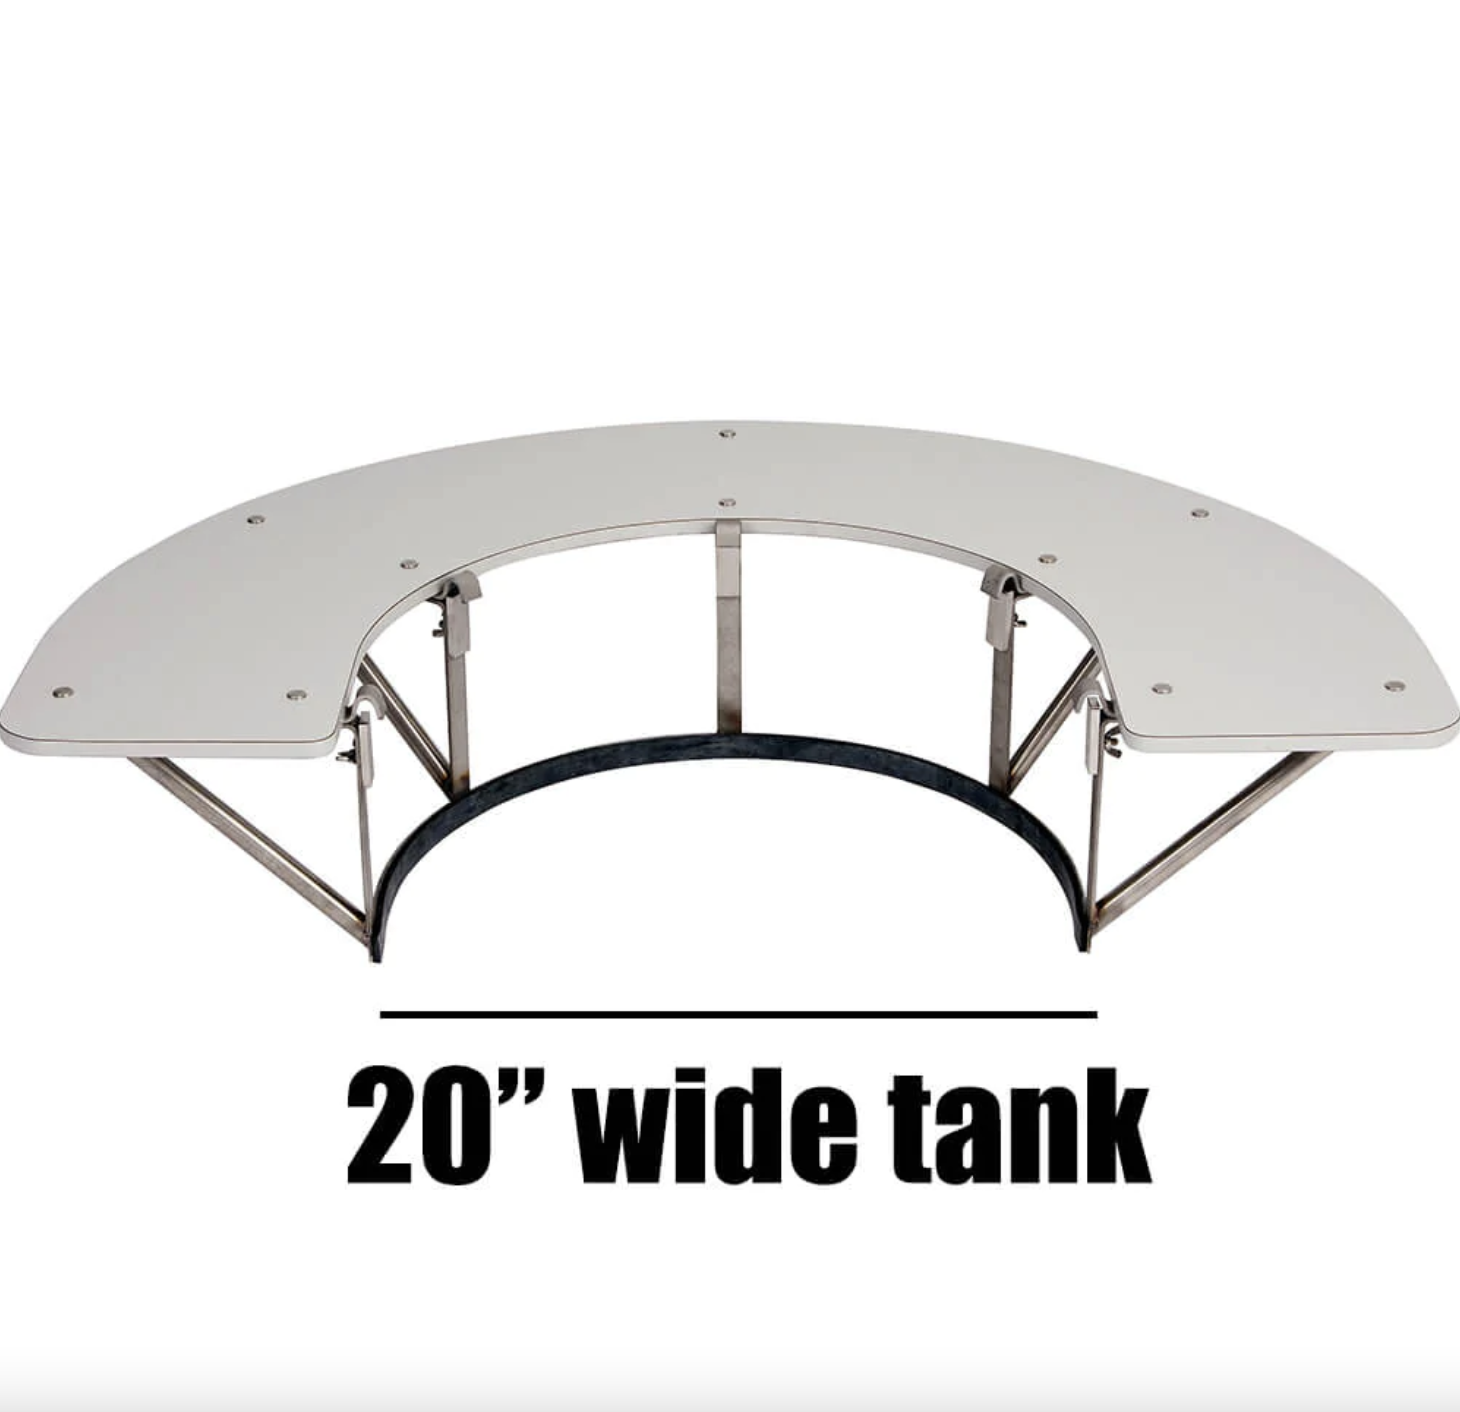 Complete Guide for the Whitehall Sports 85 Gallon Mobile Whirlpool